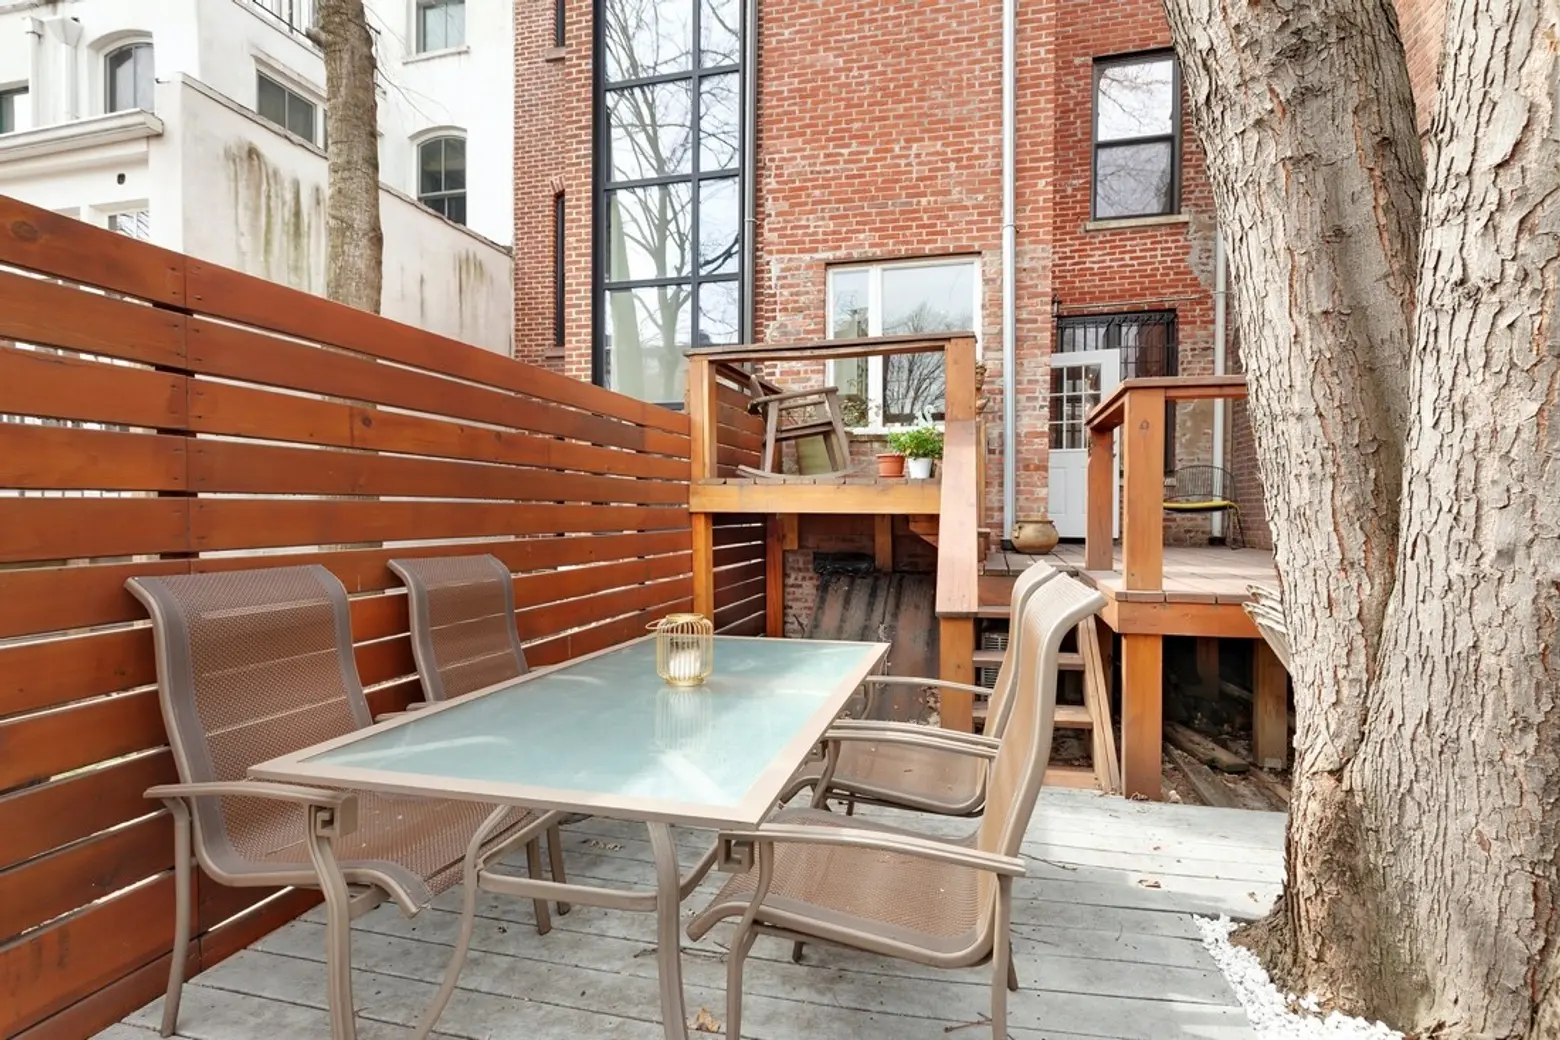 For $7,000/month, rent this modern Clinton Hill townhouse with a treehouse-like backyard